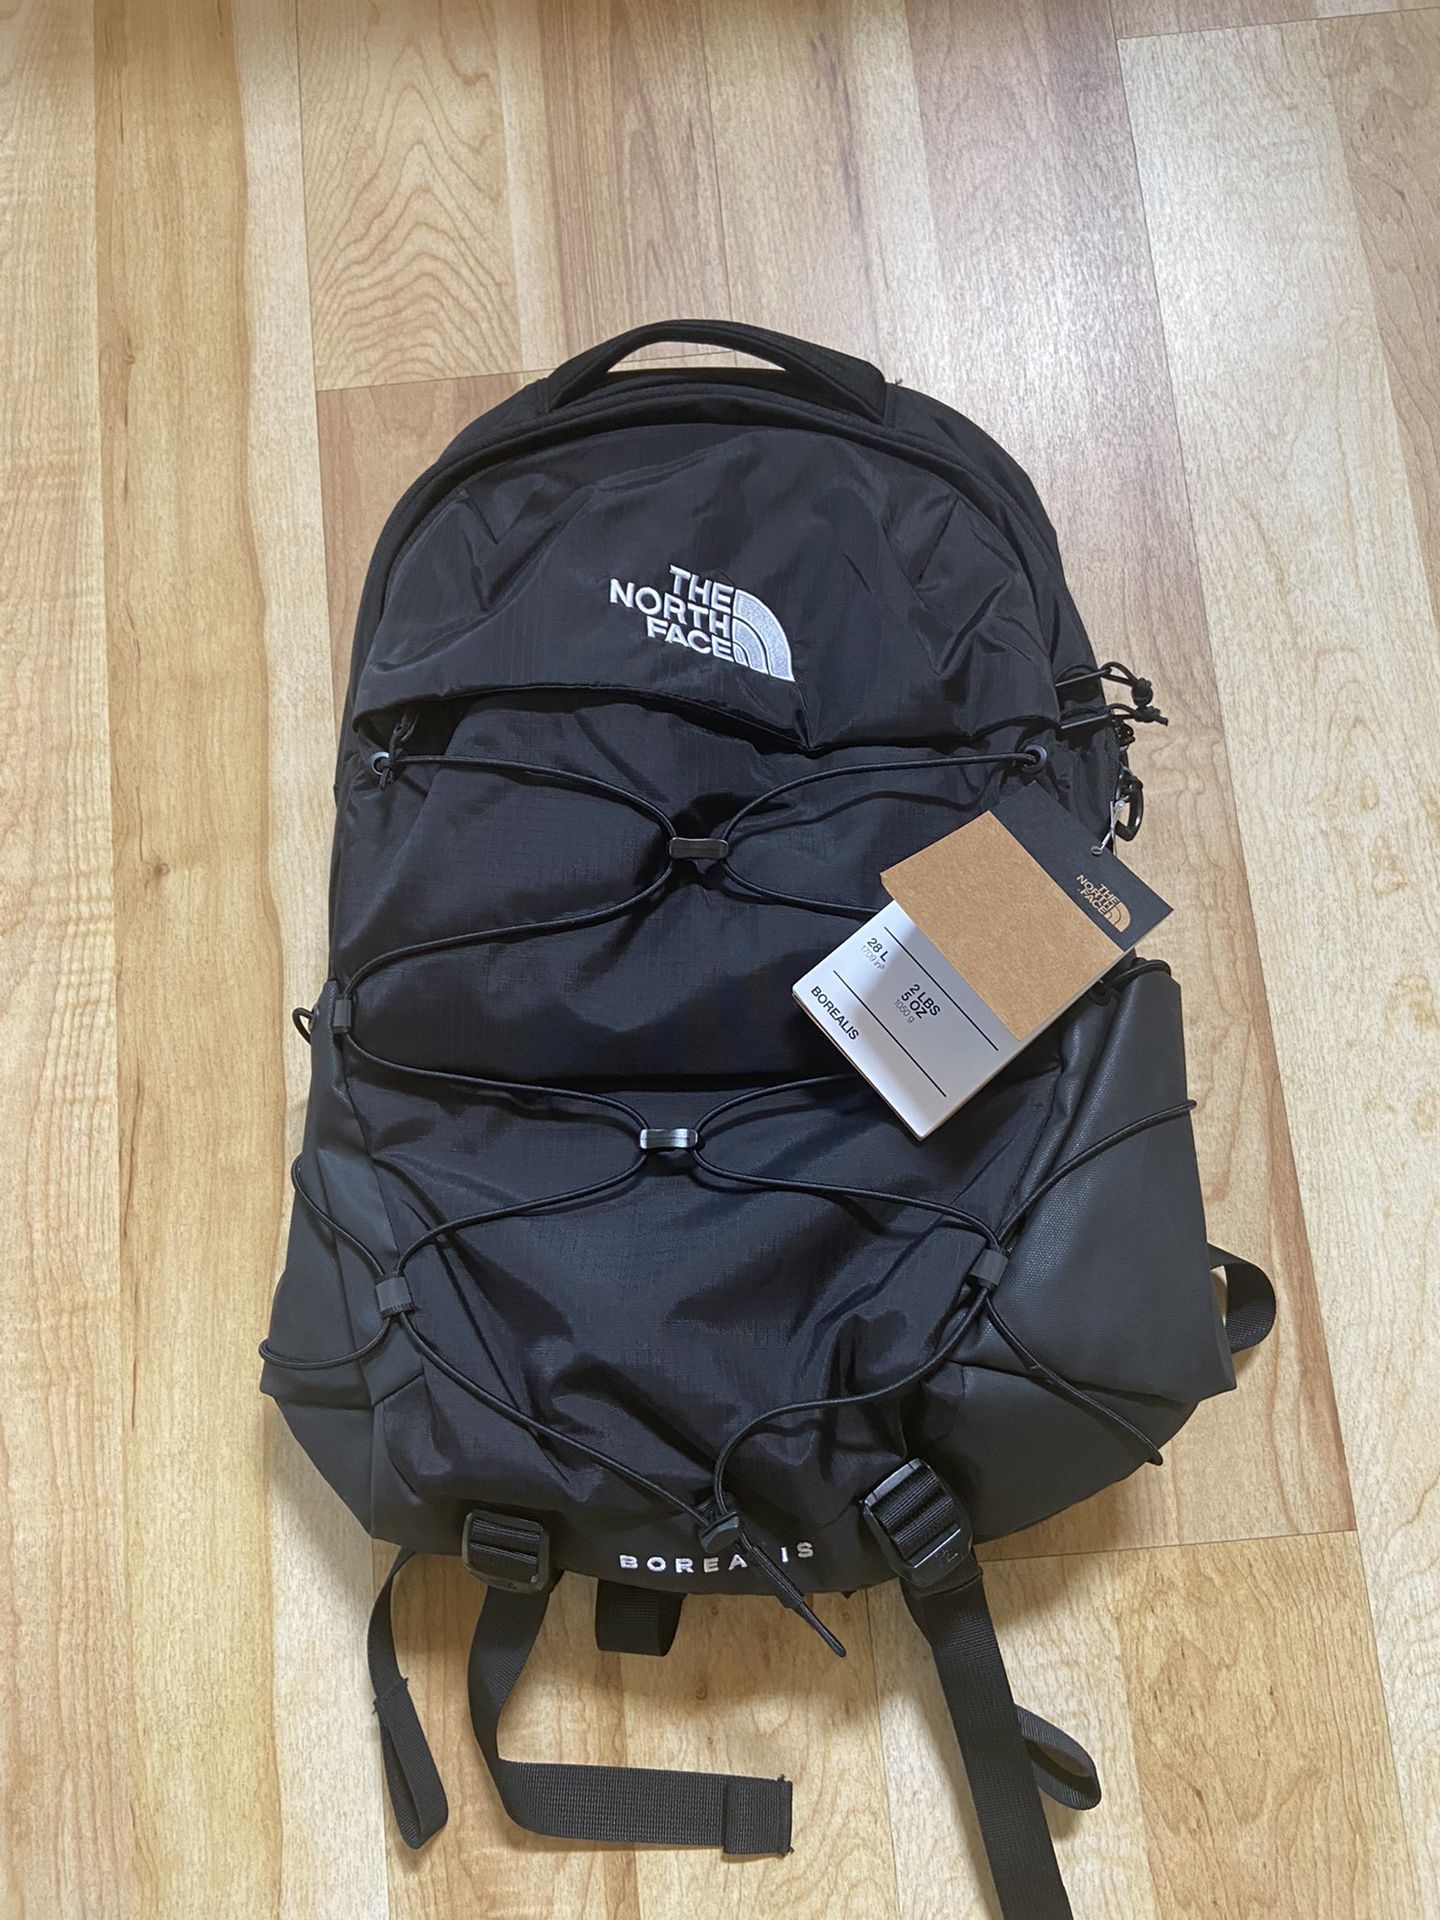 The North Face Backpack   Brand New With Tags 